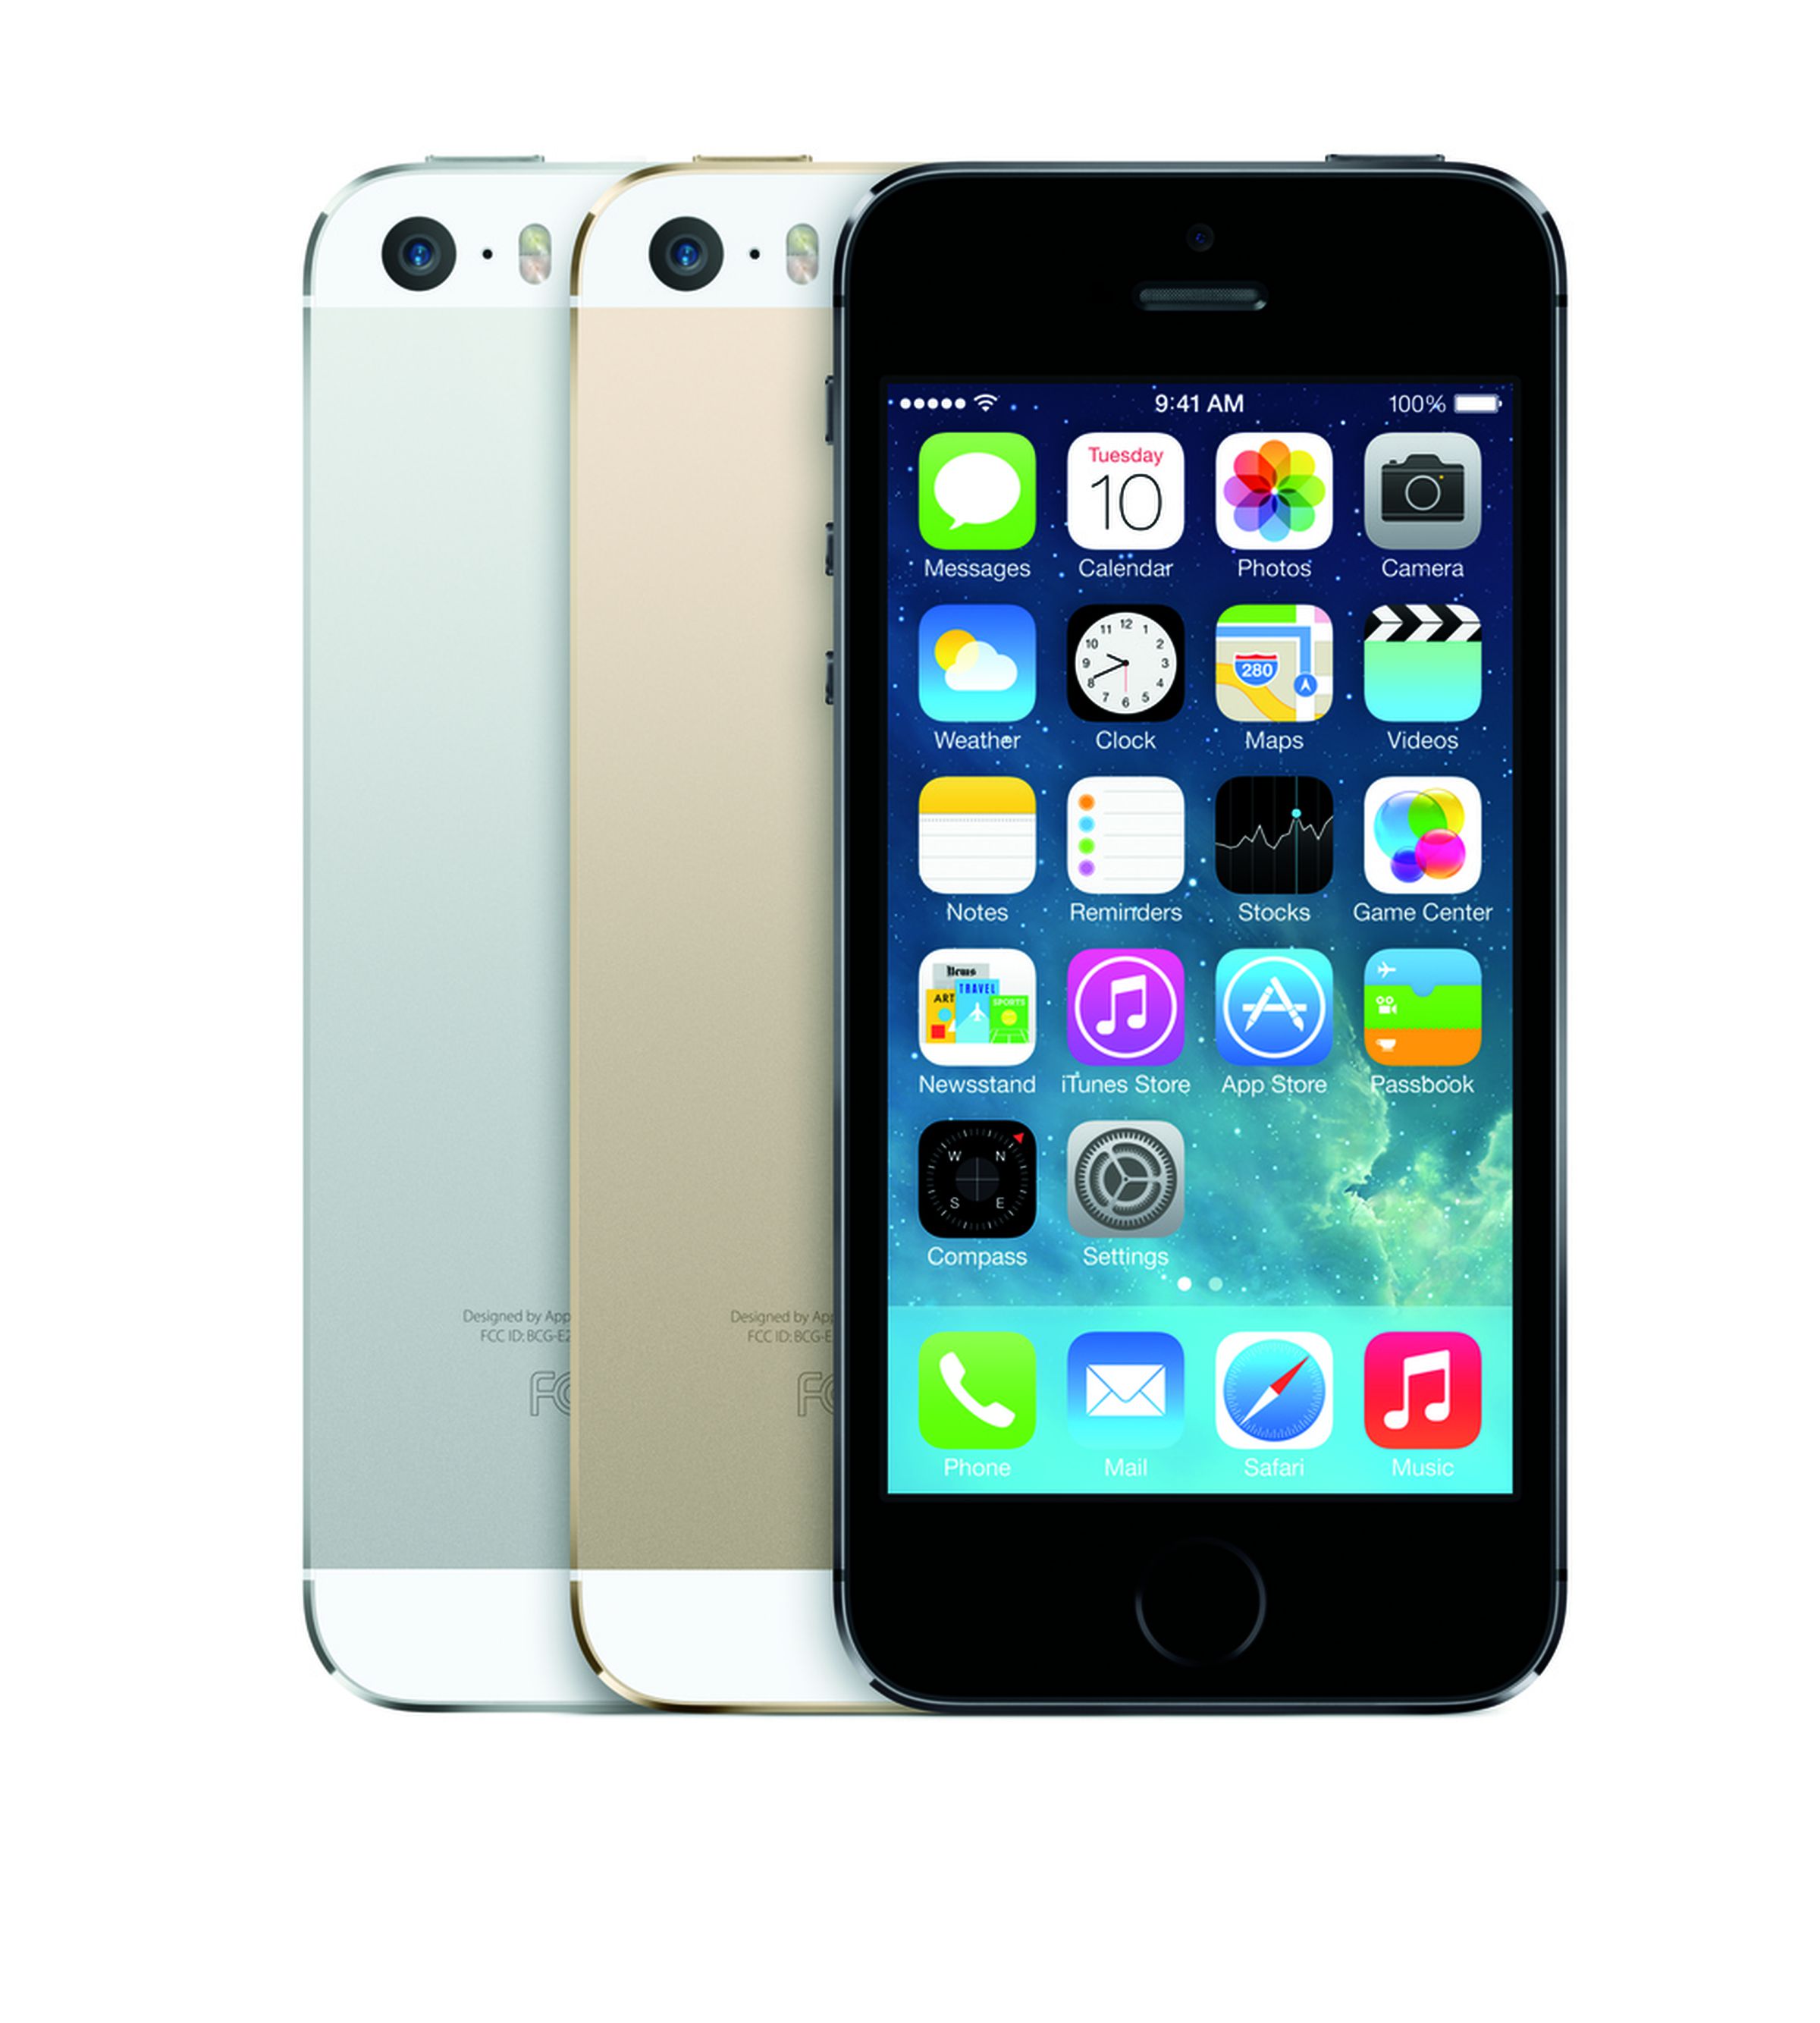 iPhone 5s Press Pictures